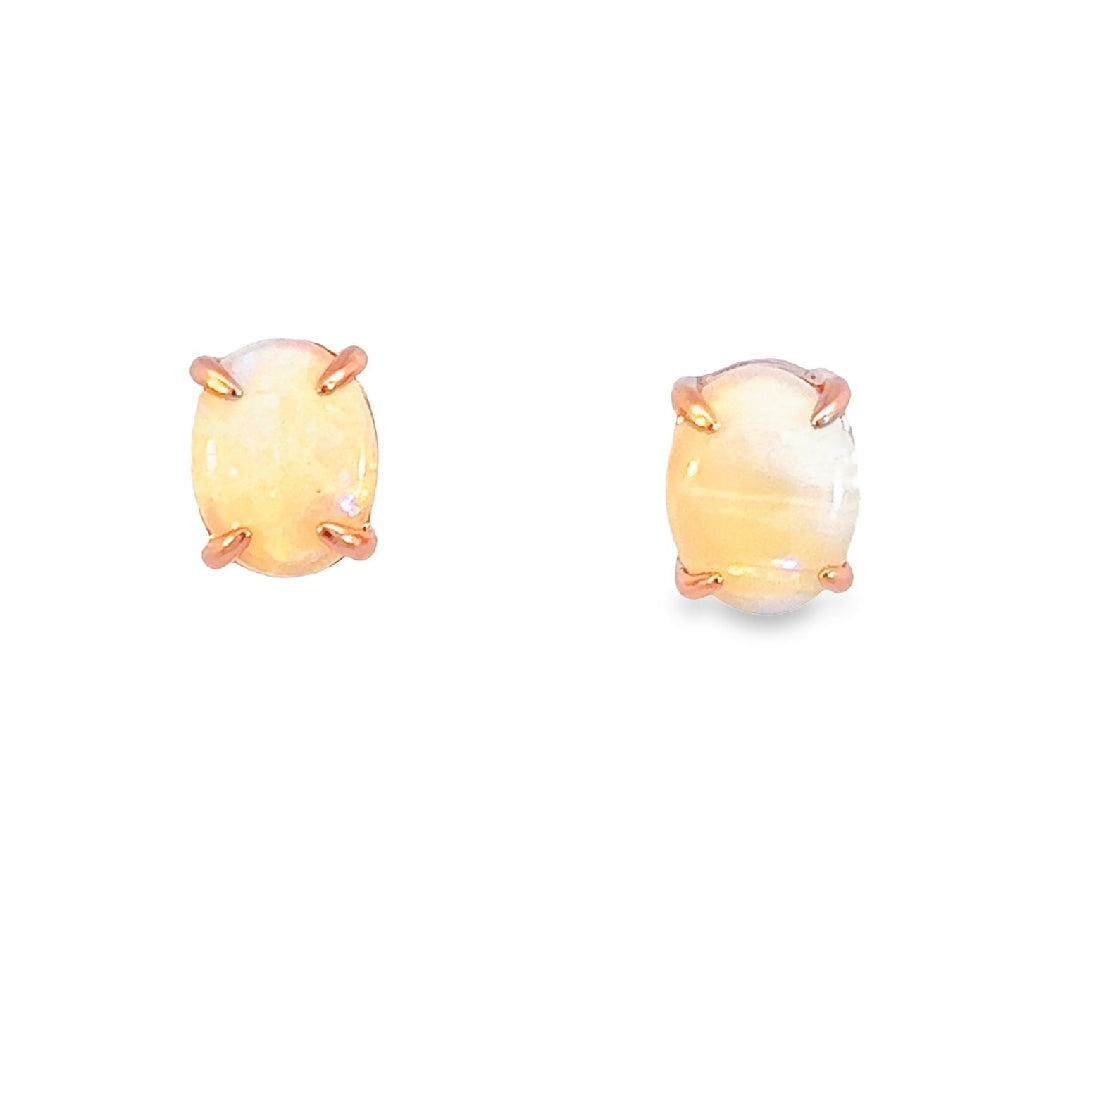 Rose Gold plated Sterling Silver White Opal studs 9x7mm pair - Masterpiece Jewellery Opal & Gems Sydney Australia | Online Shop